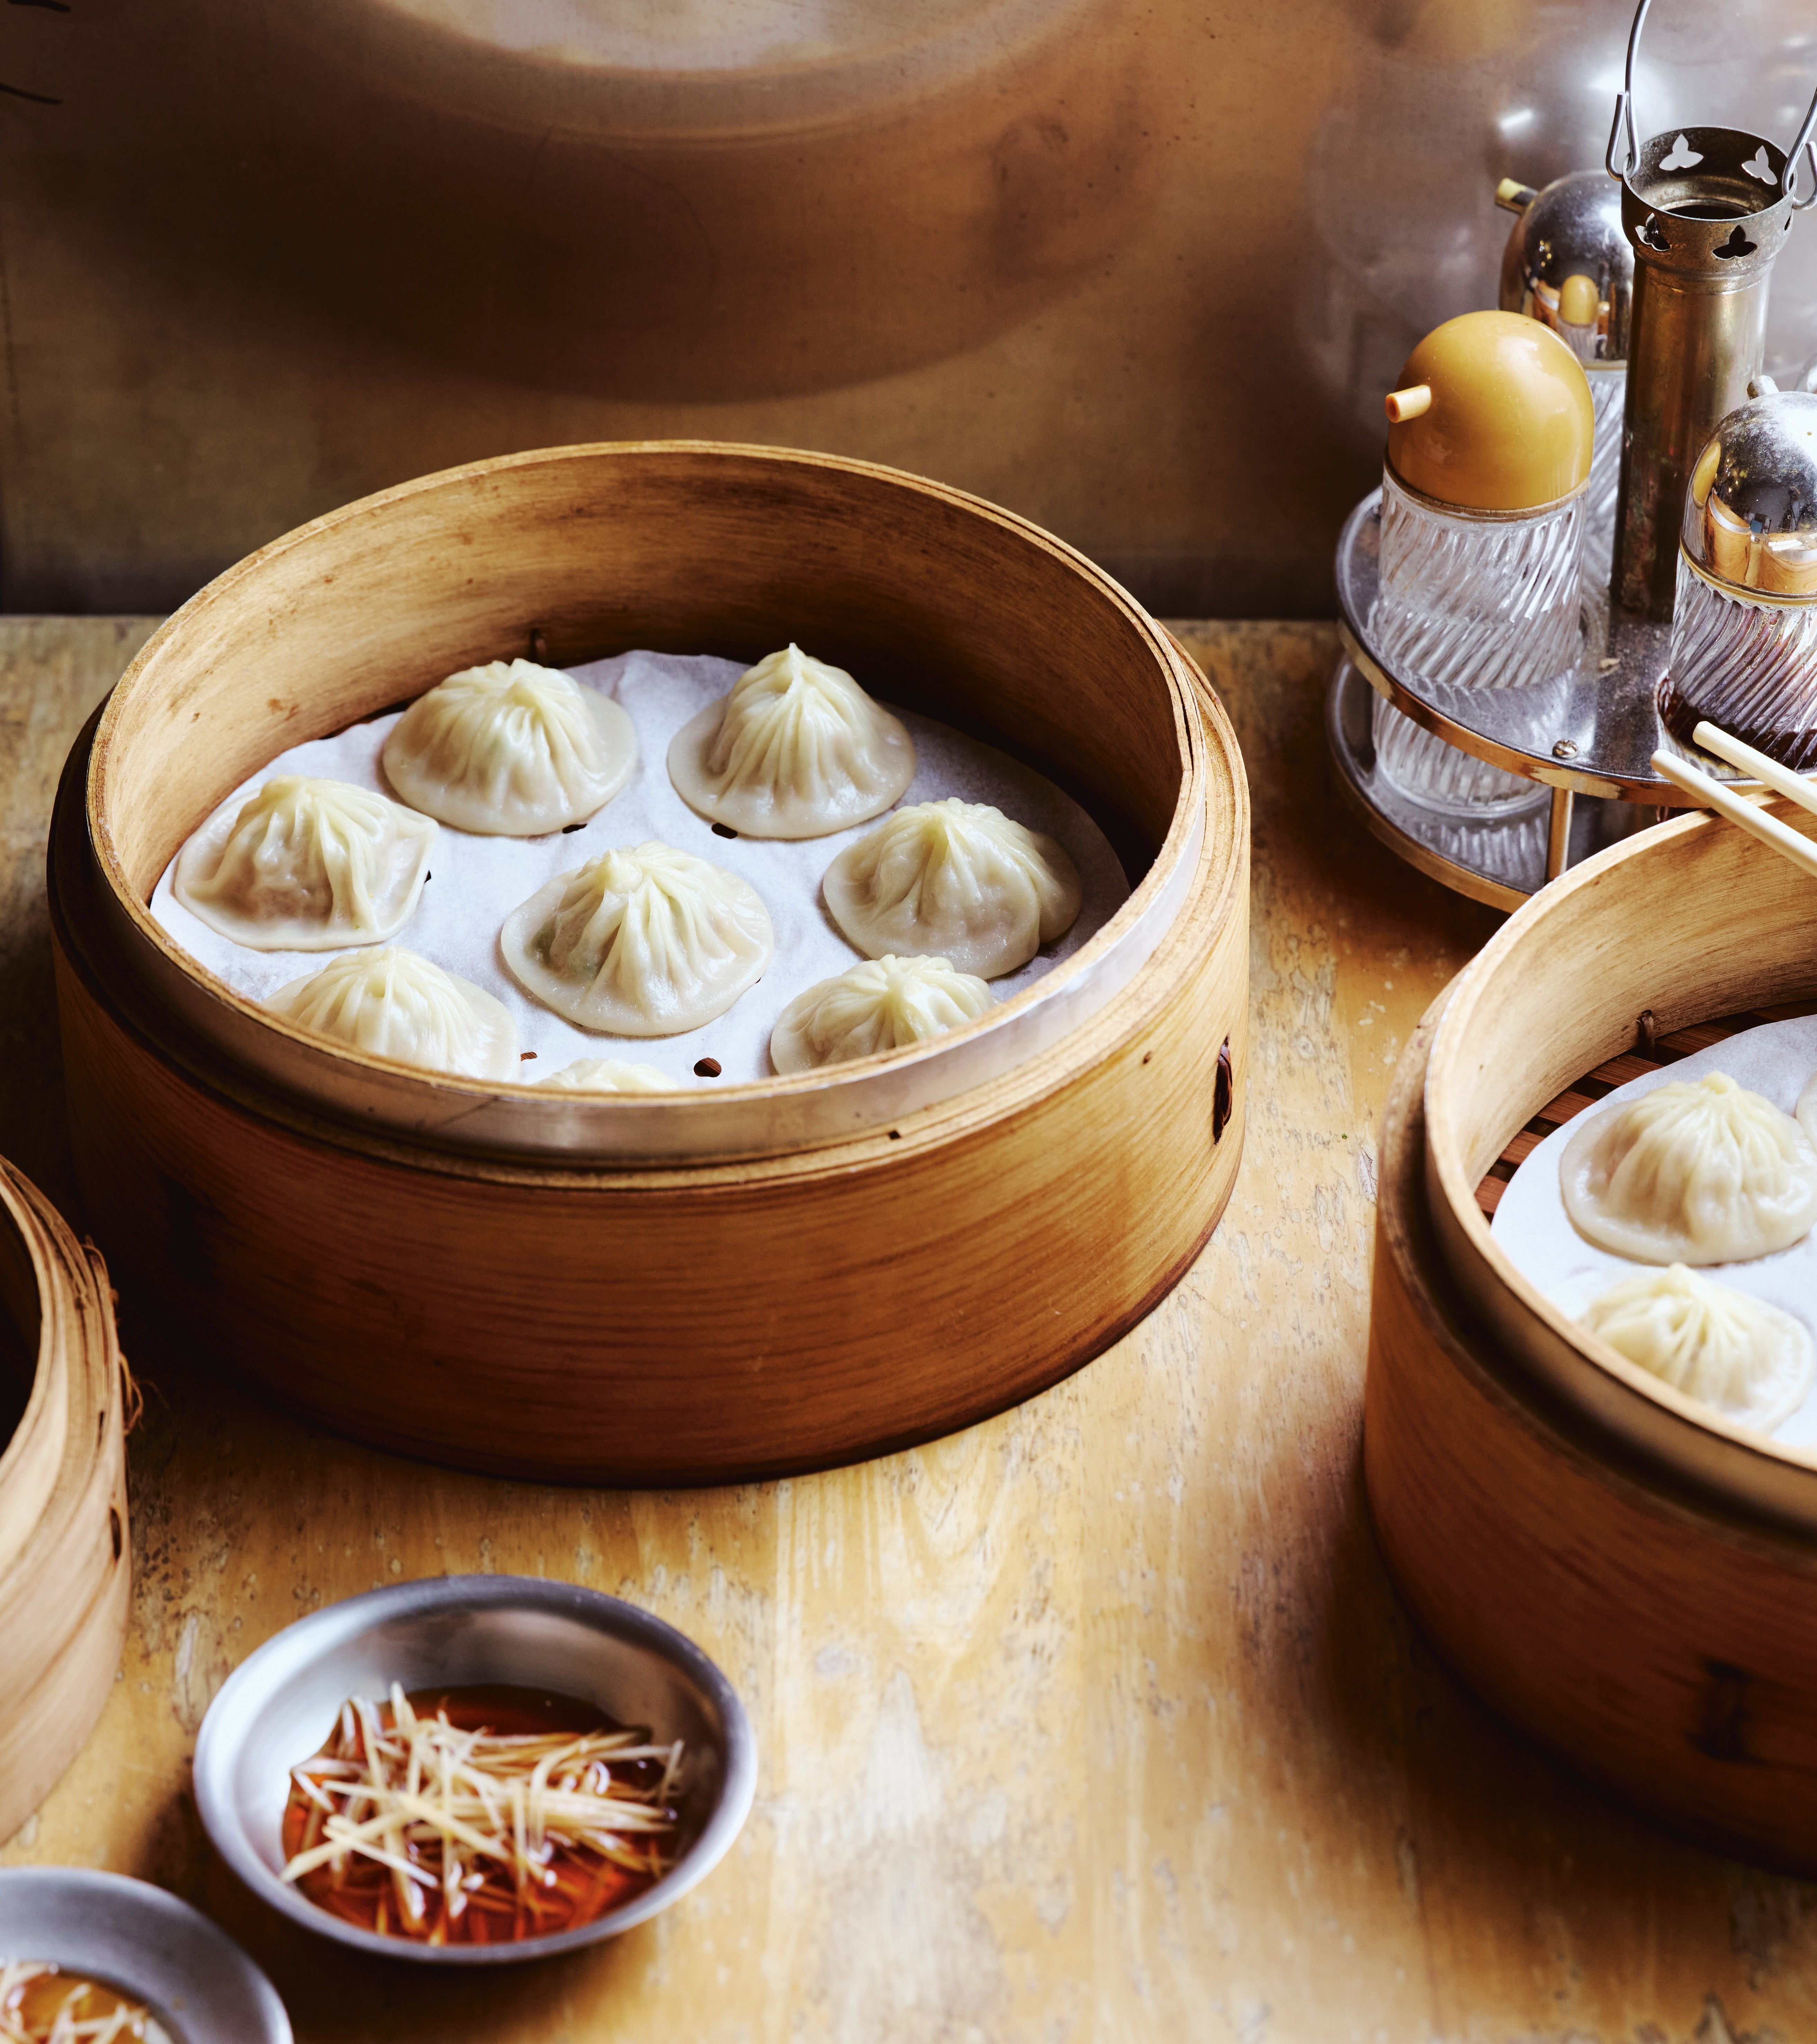 An influx of American wheat helped popularize the soup dumplings now often associated with Taiwanese cuisine.